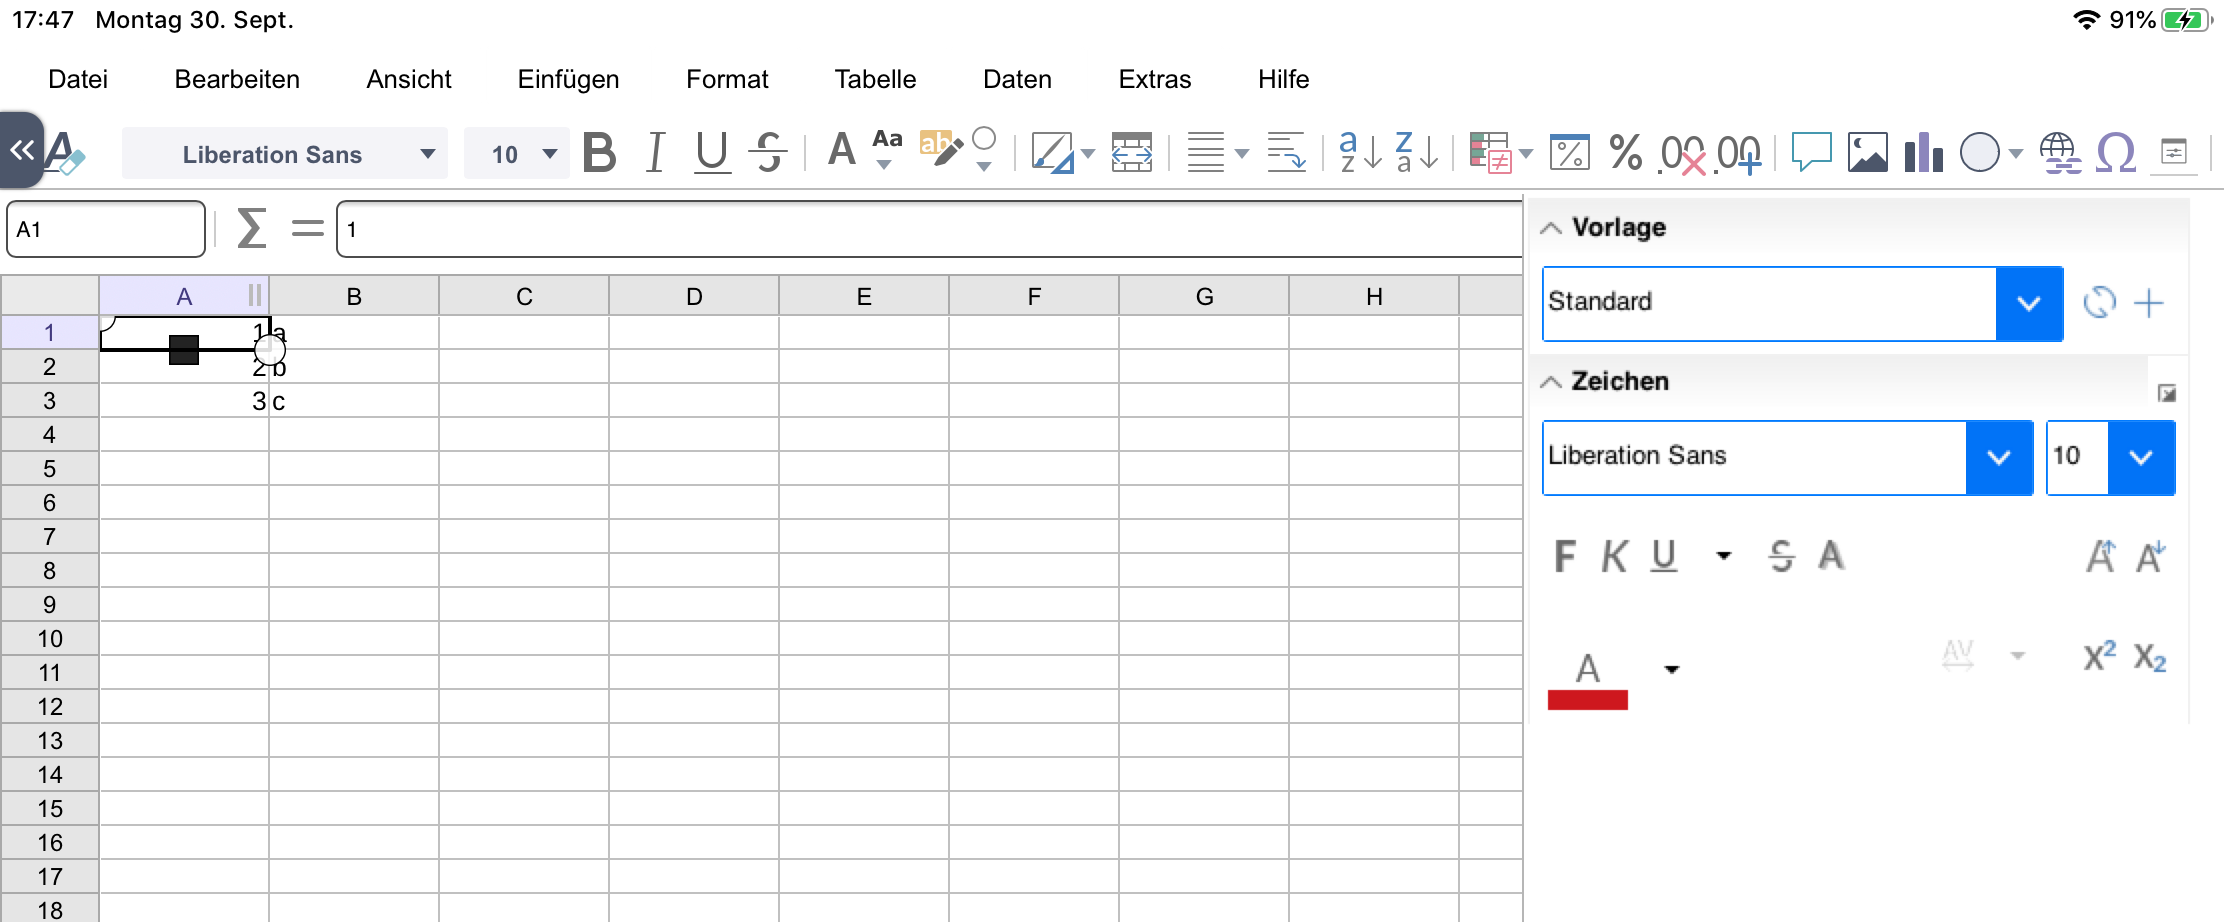 Selection of cells in a spreadsheet